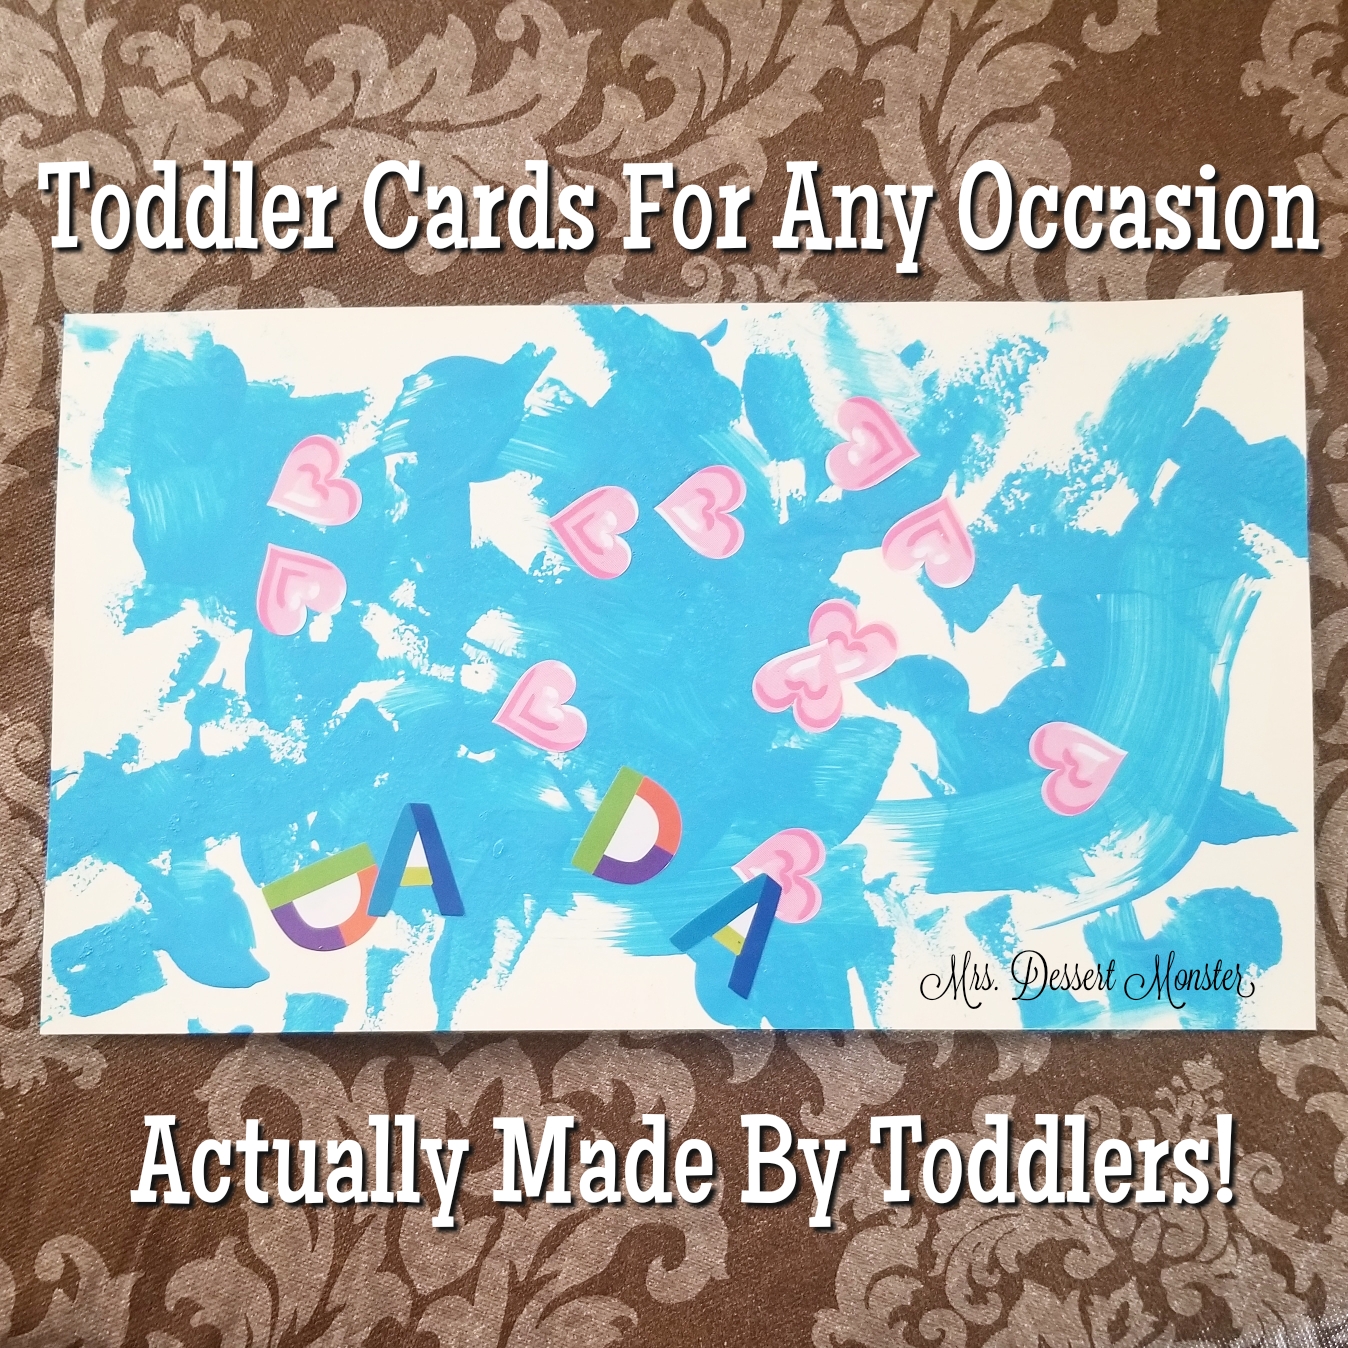 Toddler Cards for Any Occasion Made By Toddlers - Mrs. Dessert Monster